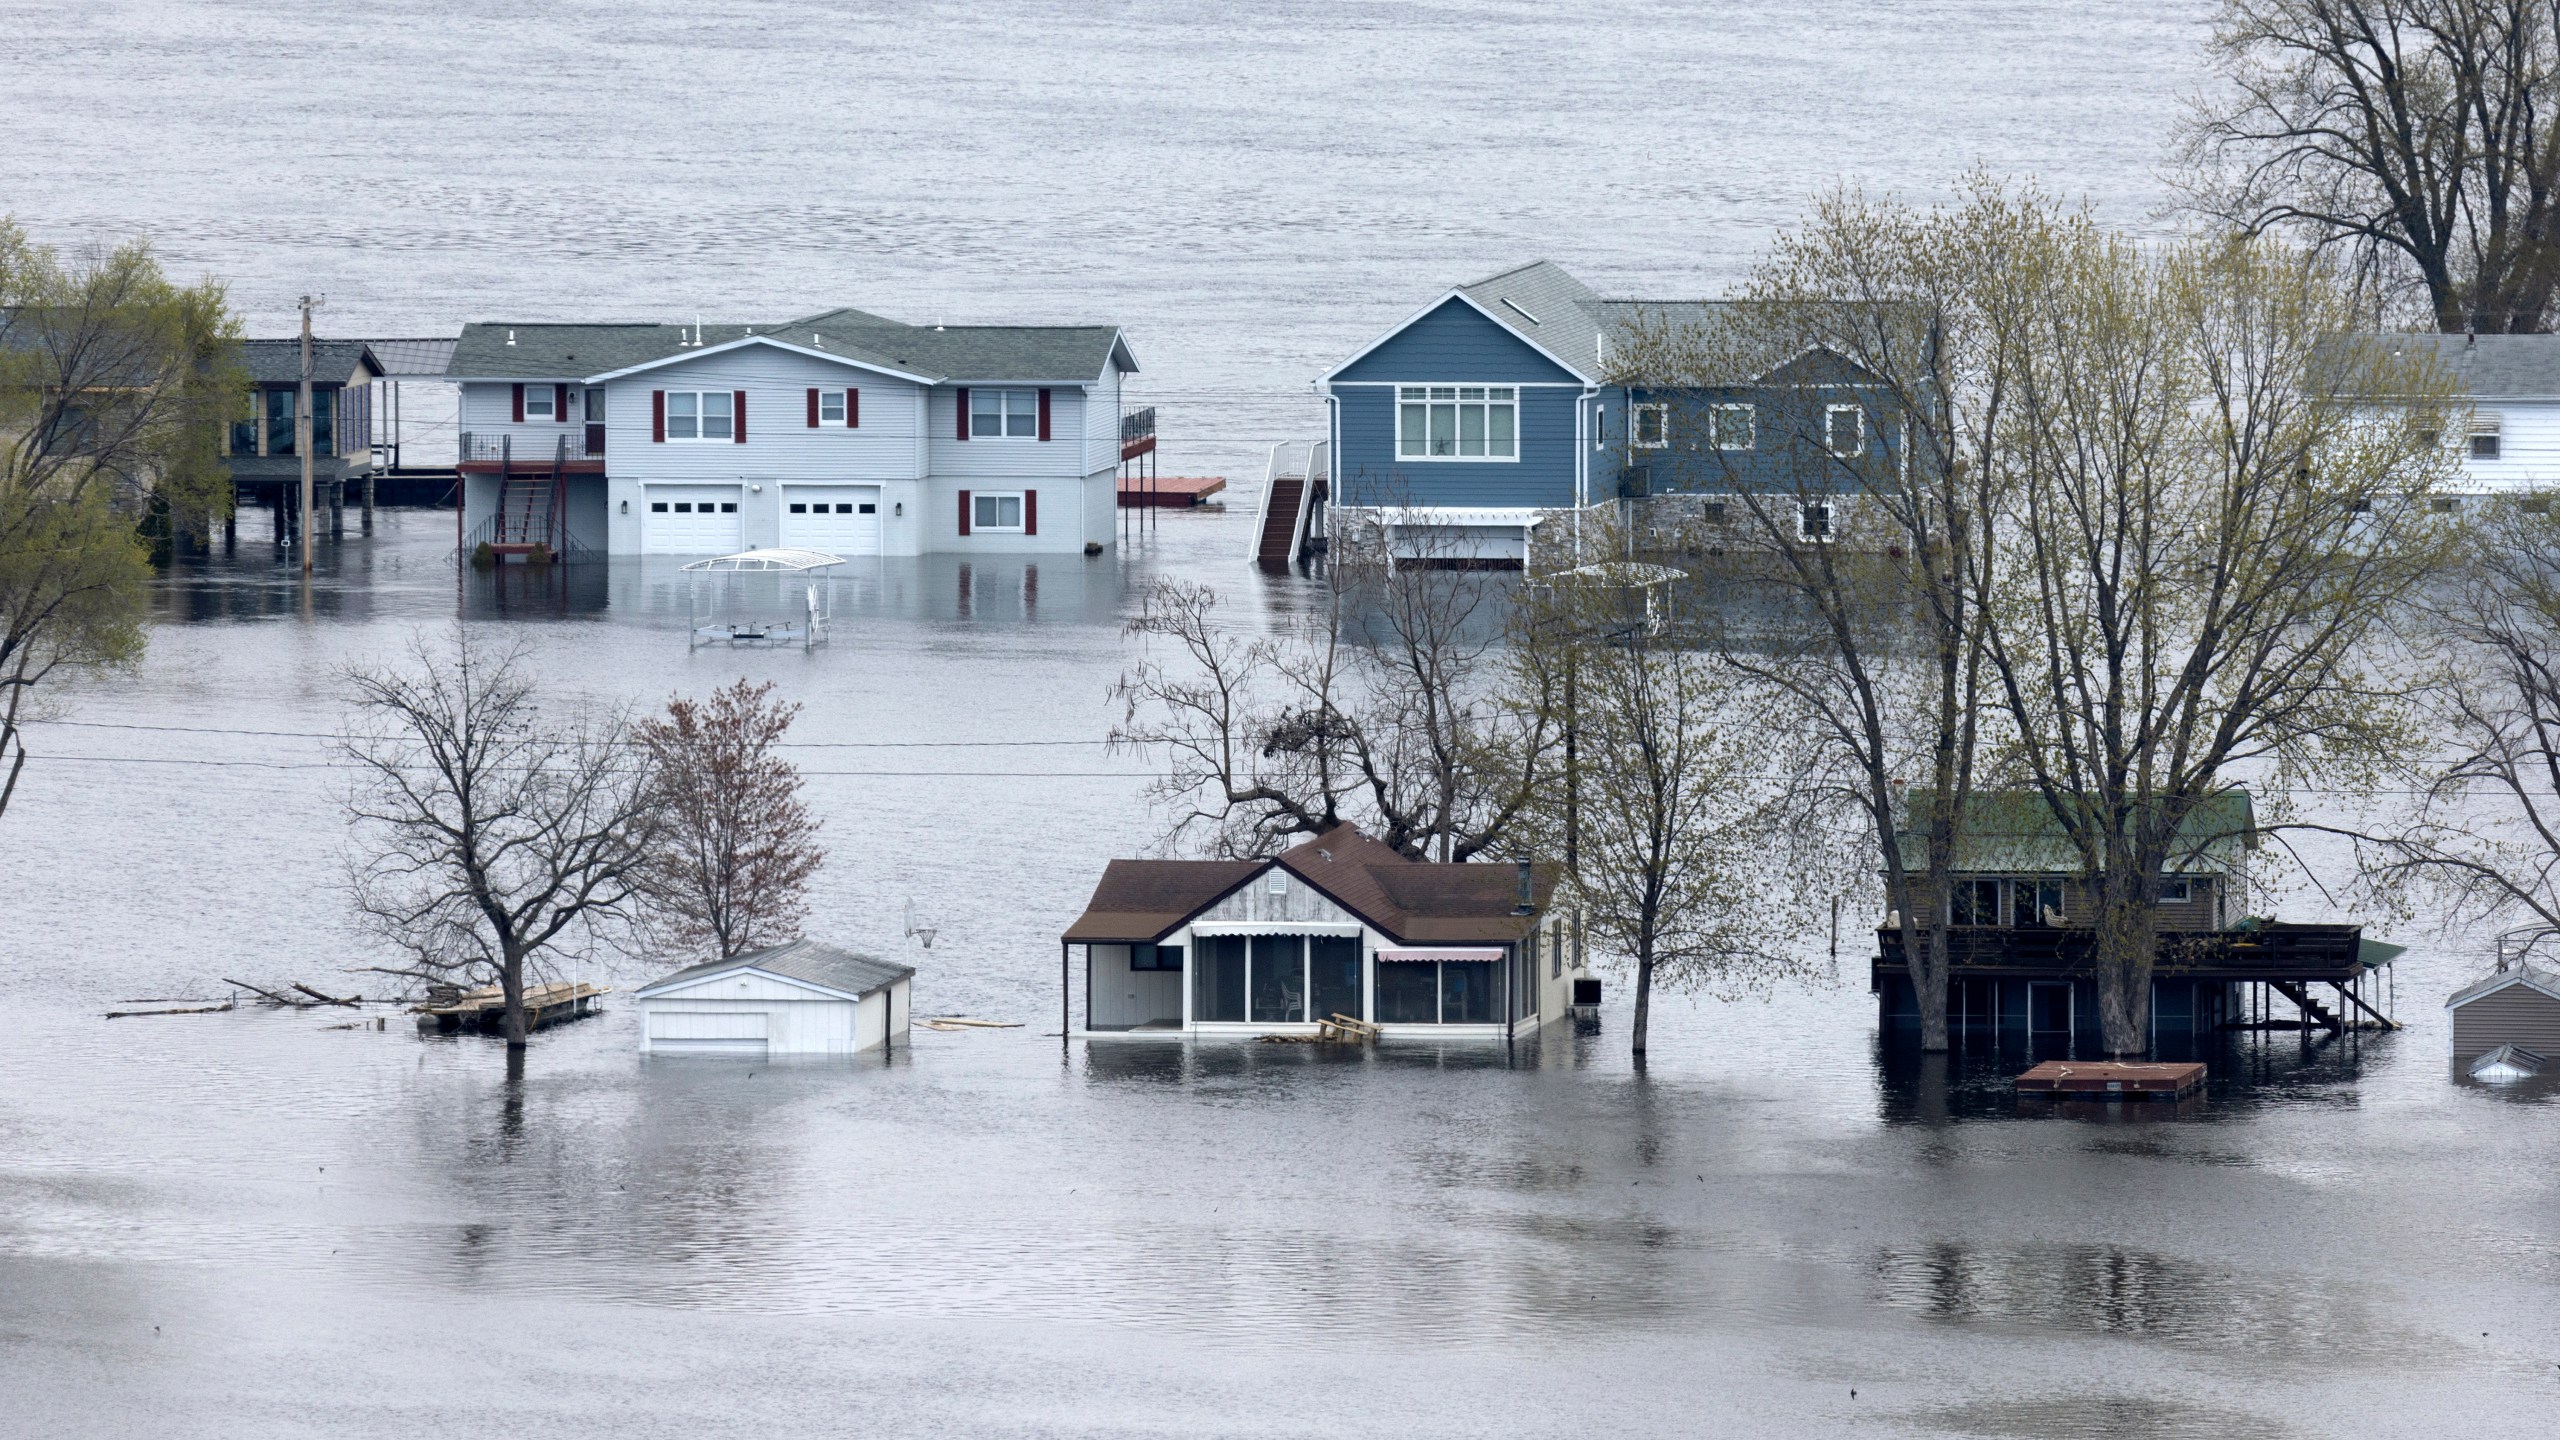 The flooded Mississippi River surrounds the homes on Abel Island near Guttenberg, Iowa, on Tuesday, April 25, 2023. (Stephen Gassman/Telegraph Herald via AP)